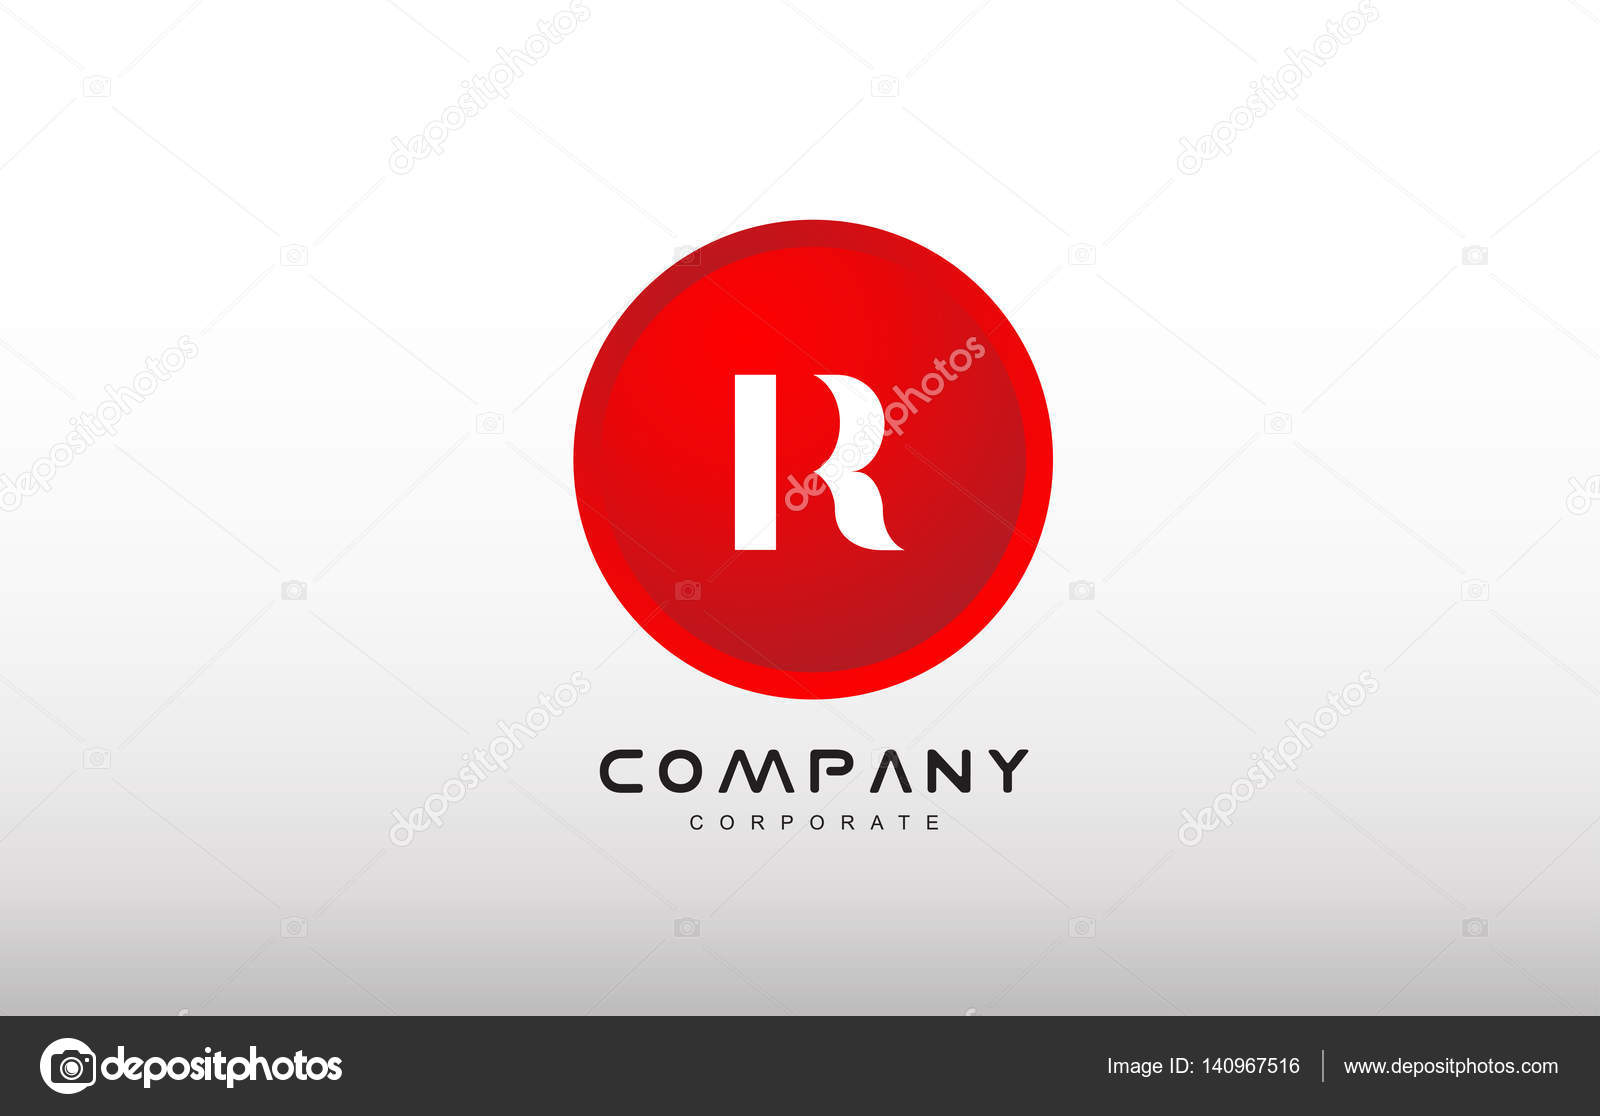 Logo Red Circle With R R Letter Alphabet Red Circle Dot Logo Vector Design Stock Vector C Dragomirescu 140967516